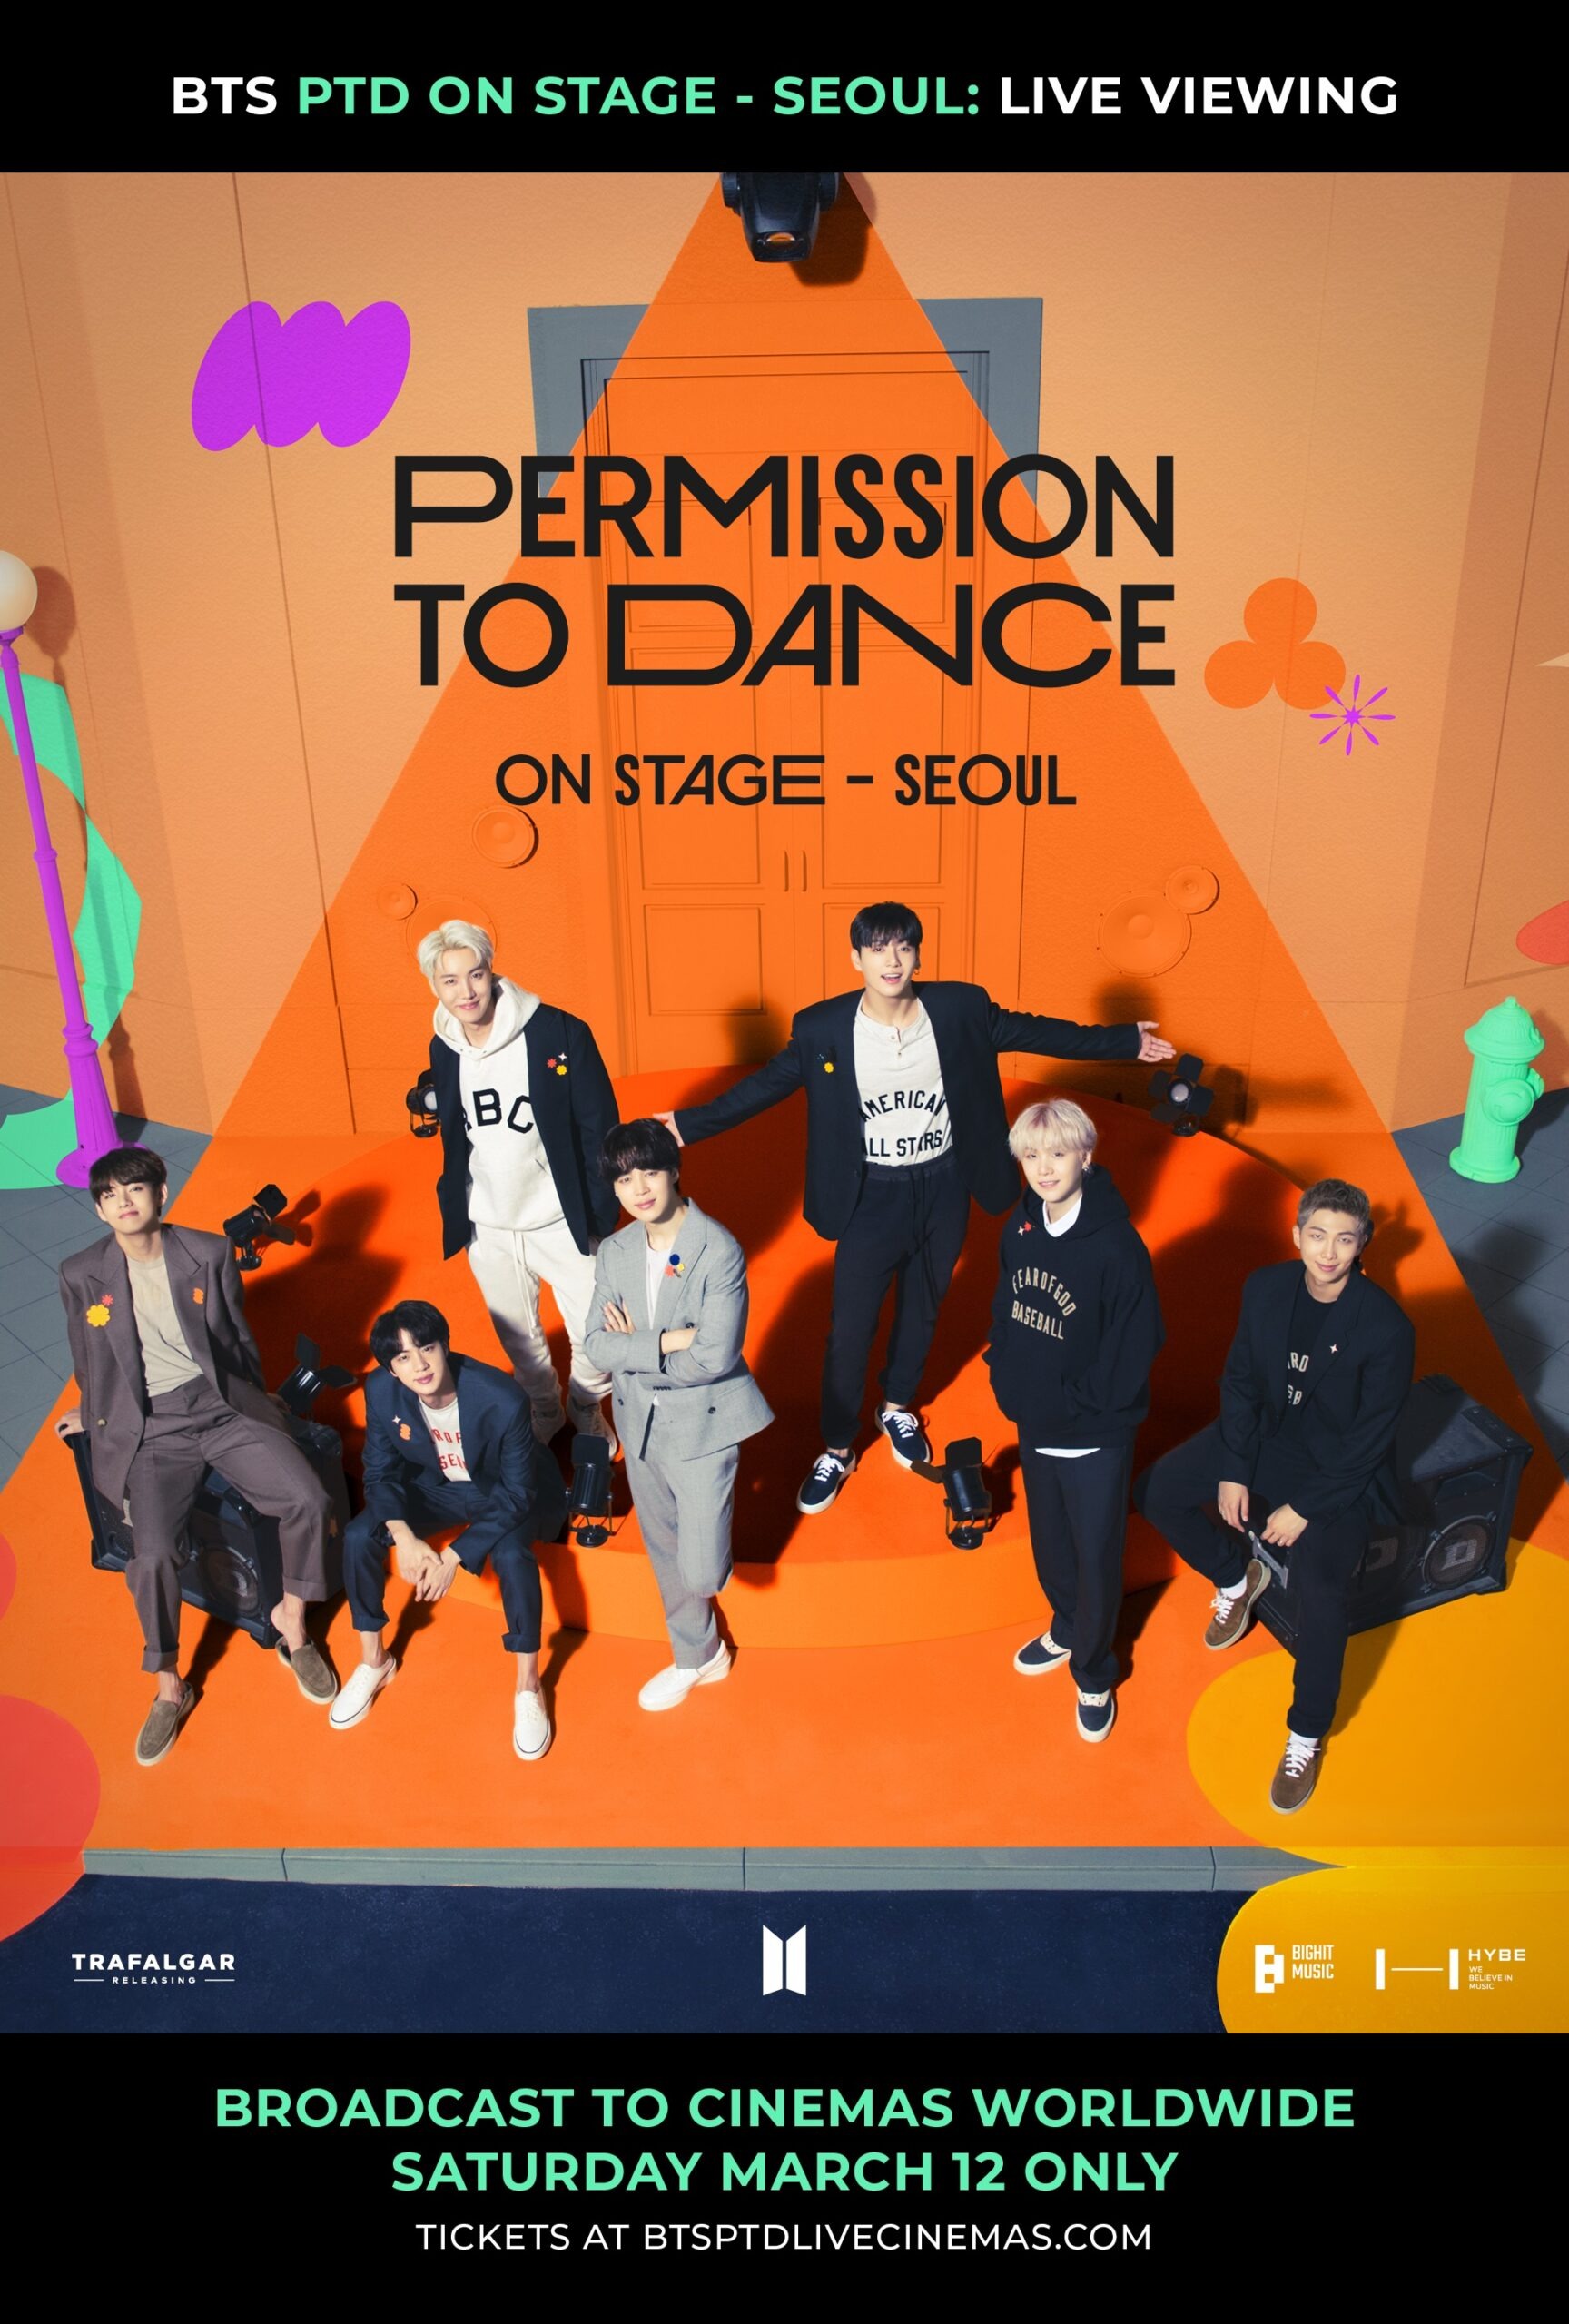 Mega Sized Movie Poster Image for BTS Permission to Dance on Stage - Seoul: Live Viewing 